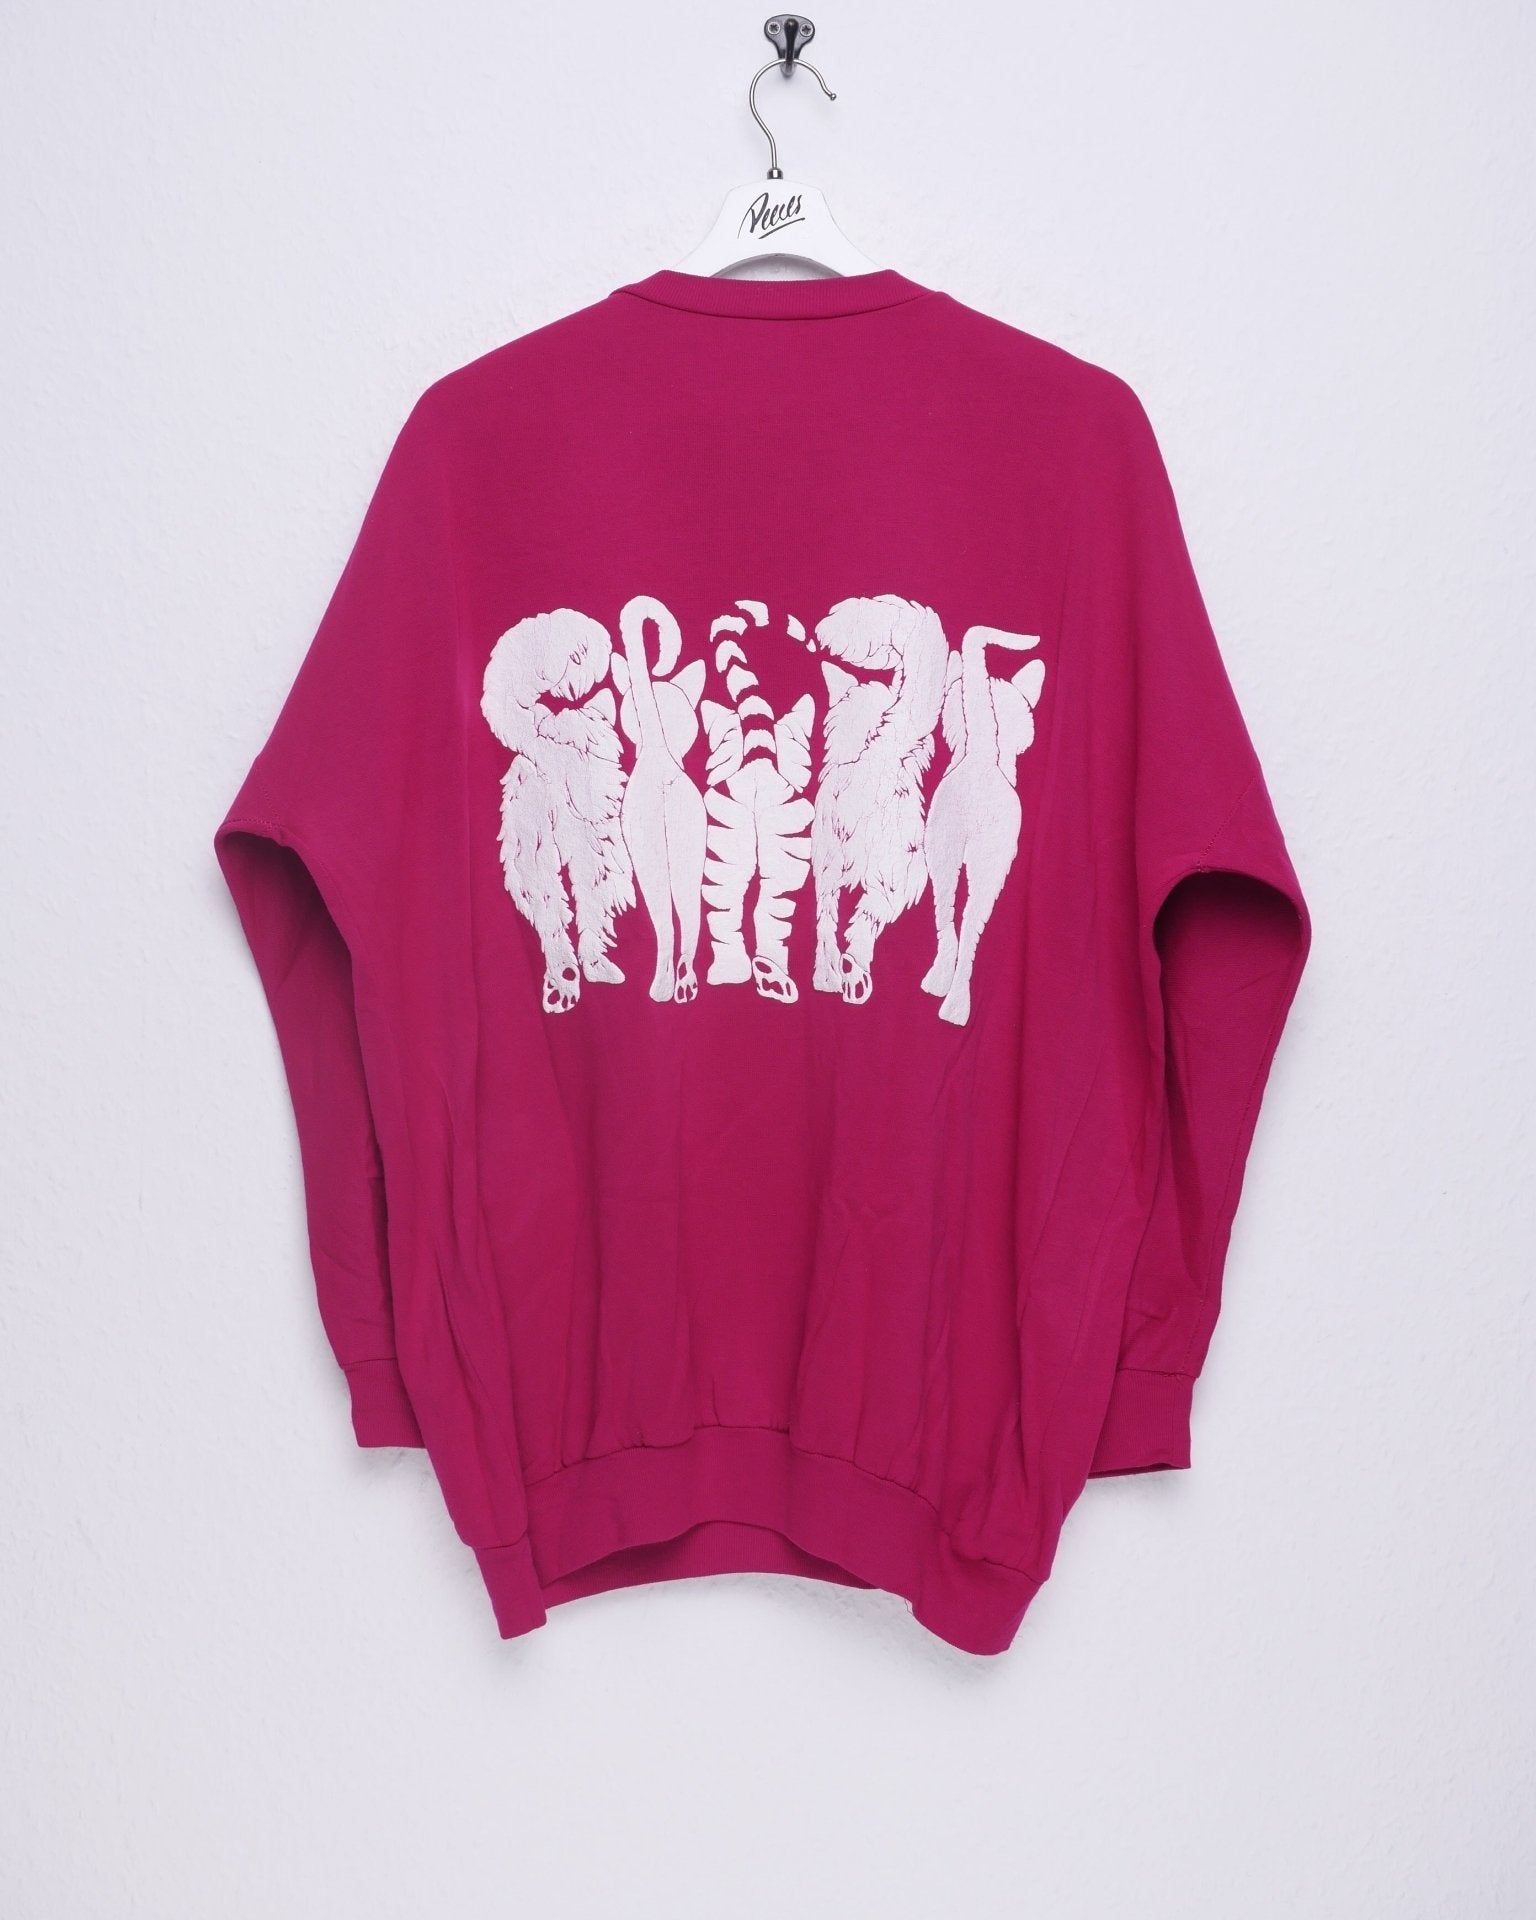 Cats printed Graphic pink Sweater - Peeces